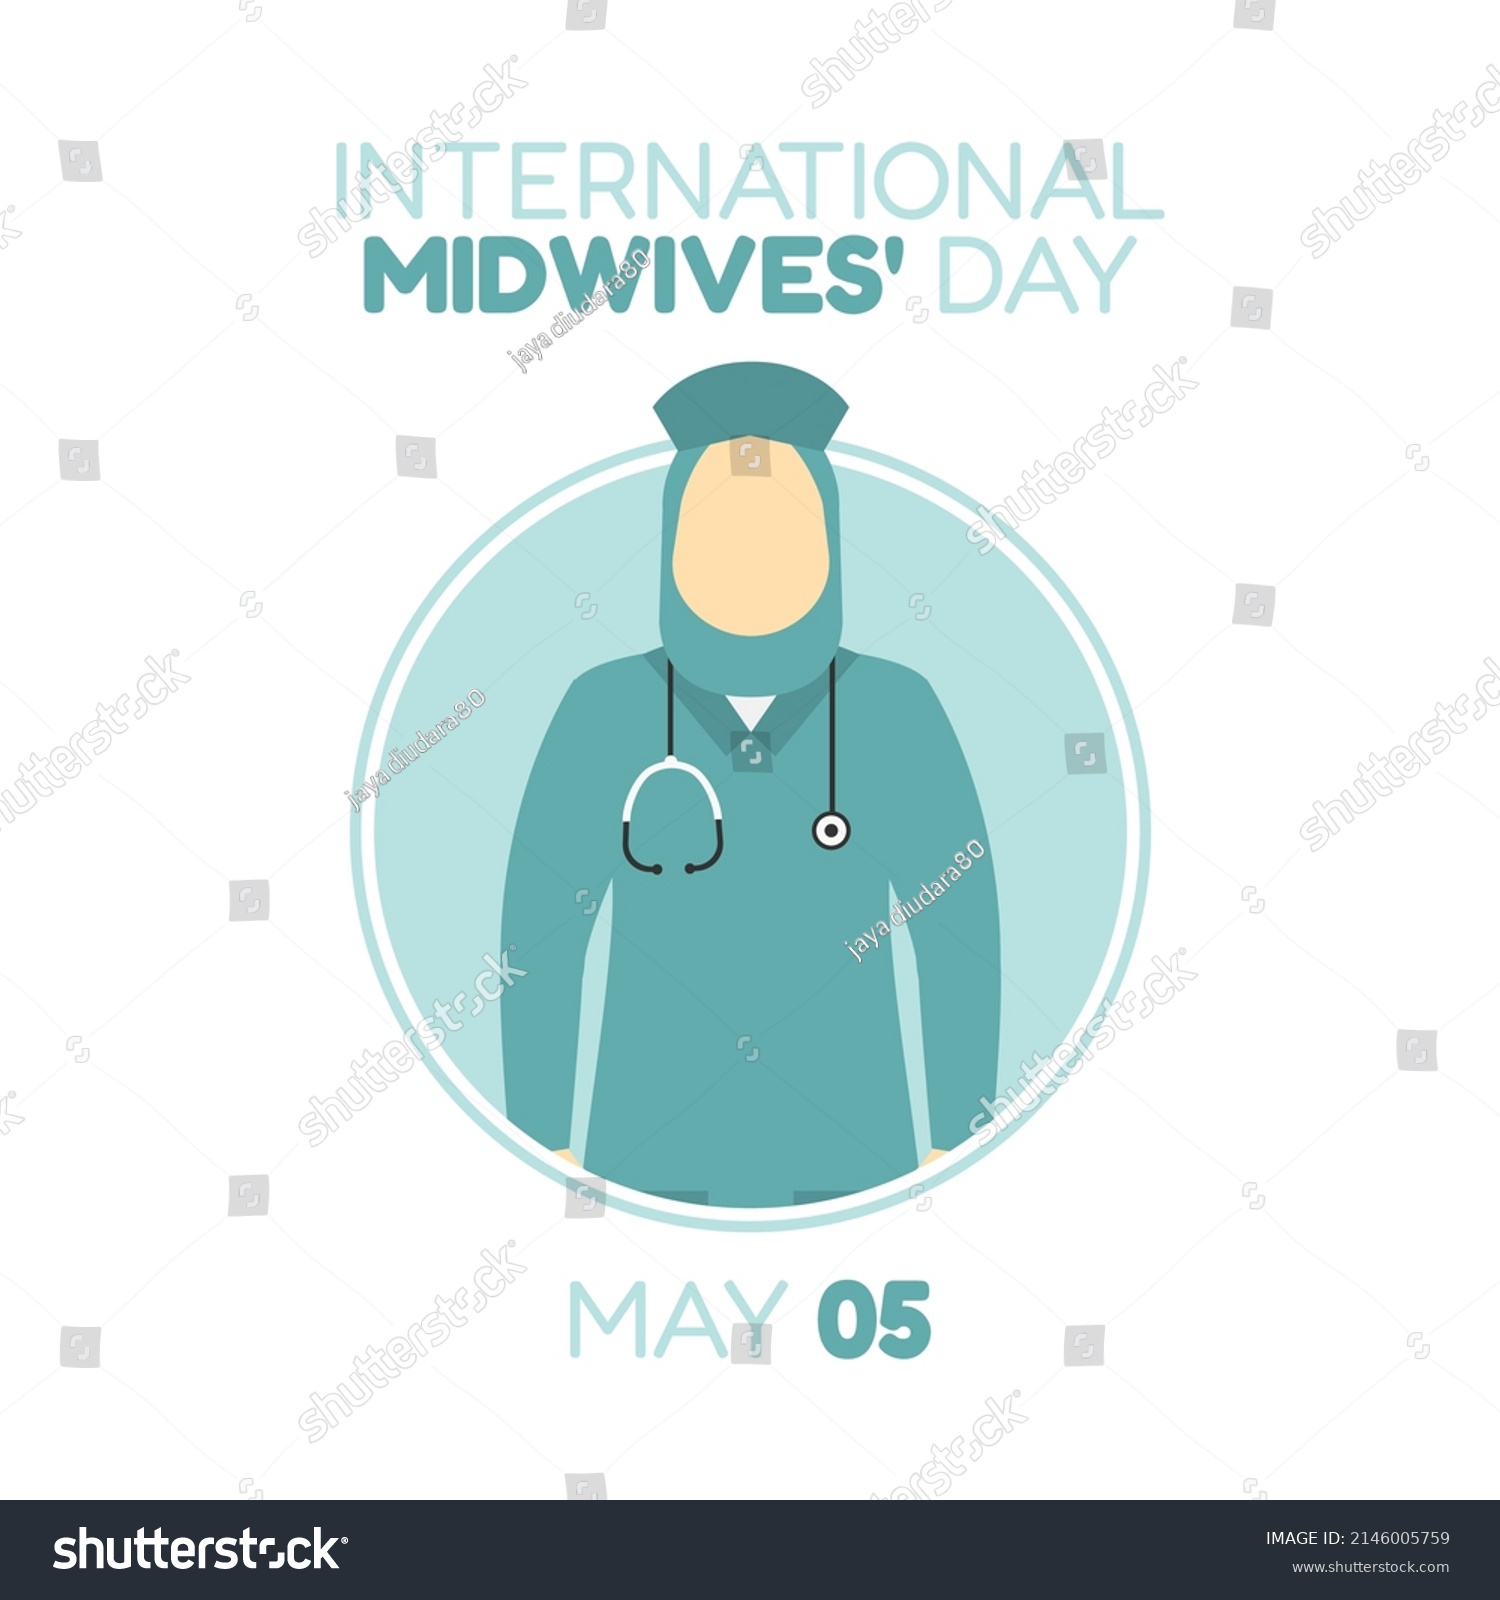 Vector Graphic International Midwives Day Good Stock Vector Royalty Free 2146005759 Shutterstock 8746